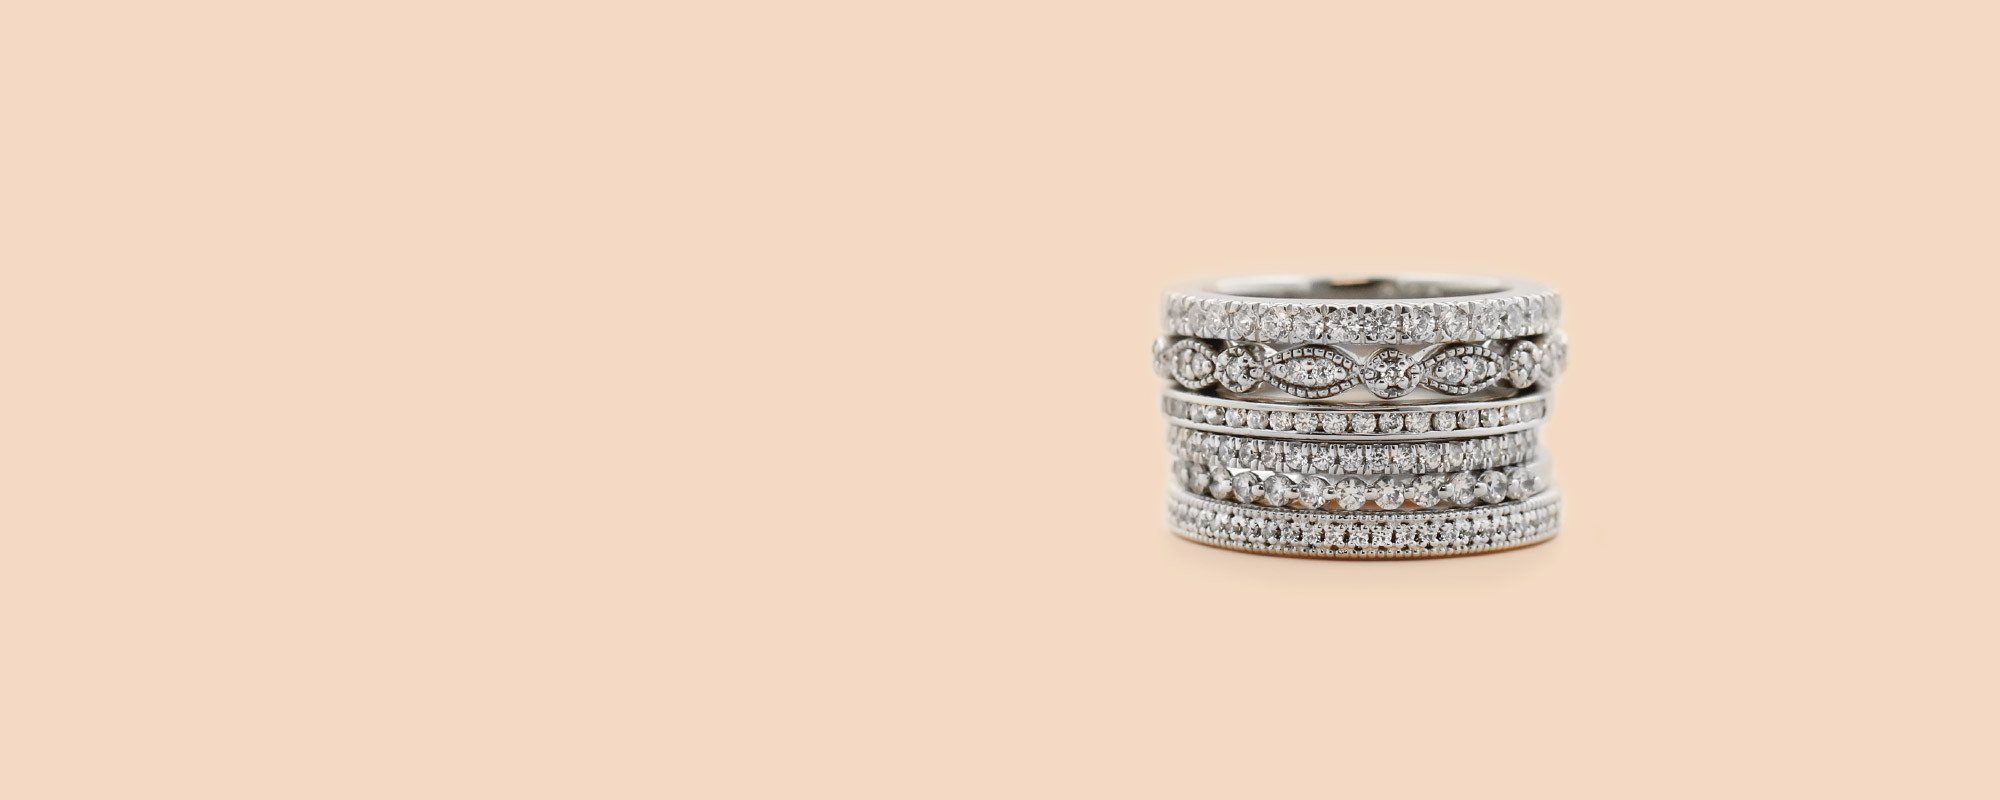 Best Selling Wedding Bands